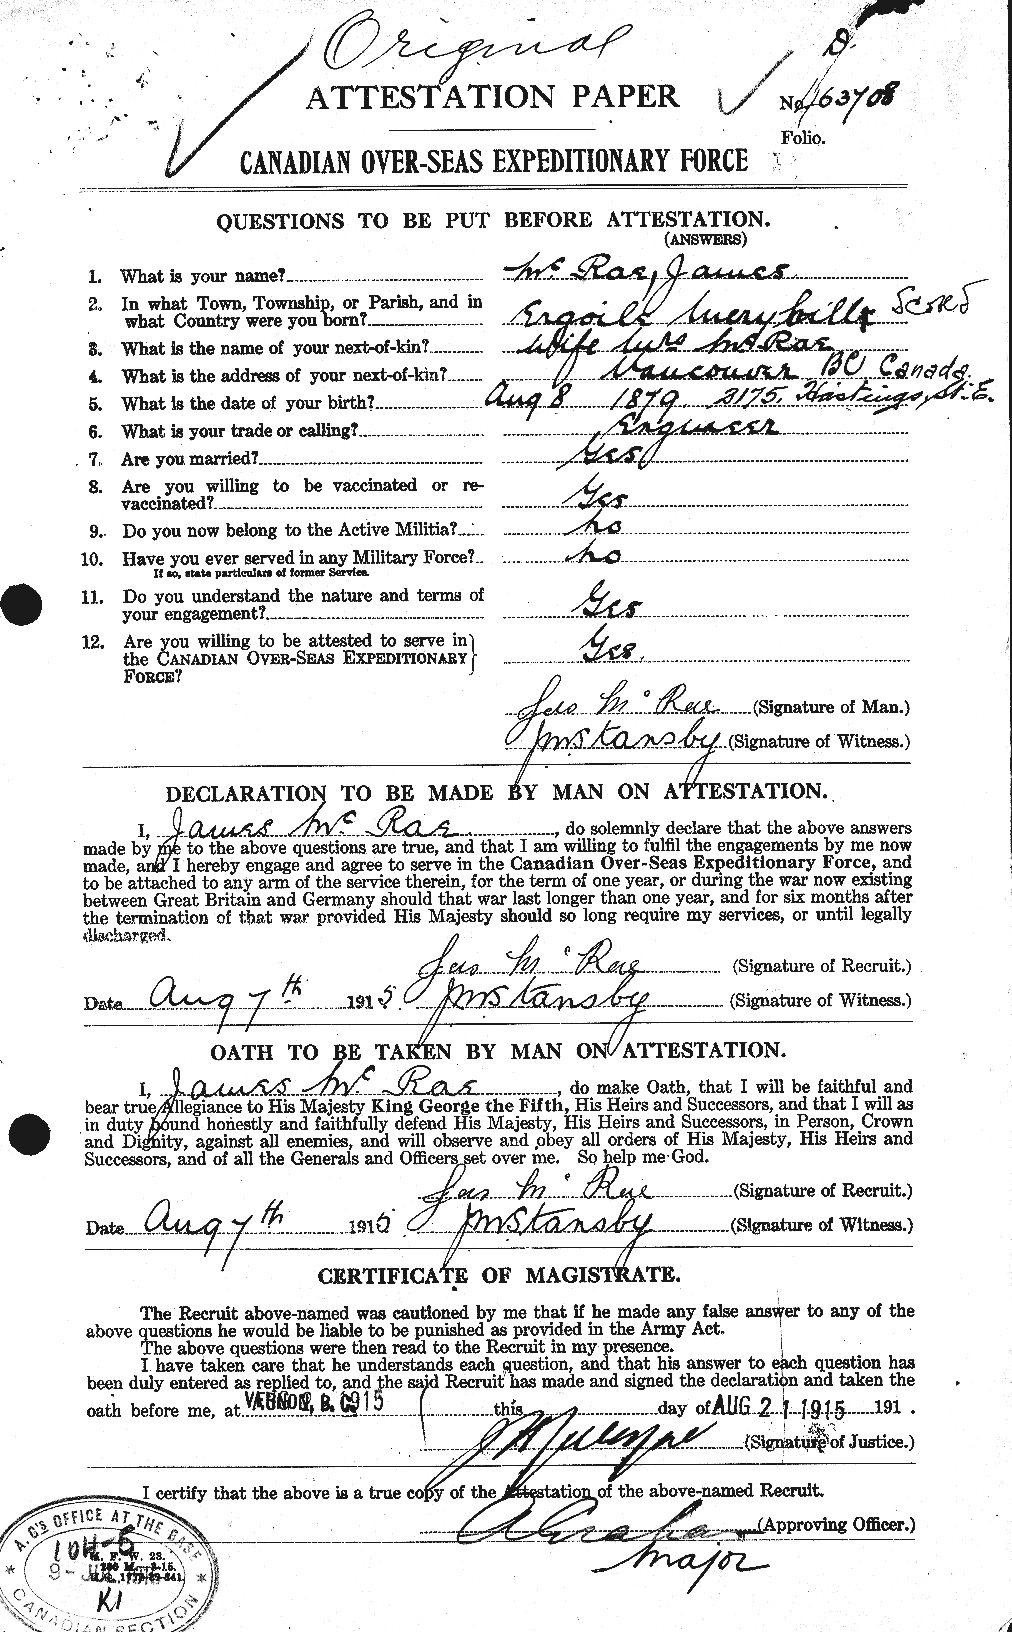 Personnel Records of the First World War - CEF 542775a